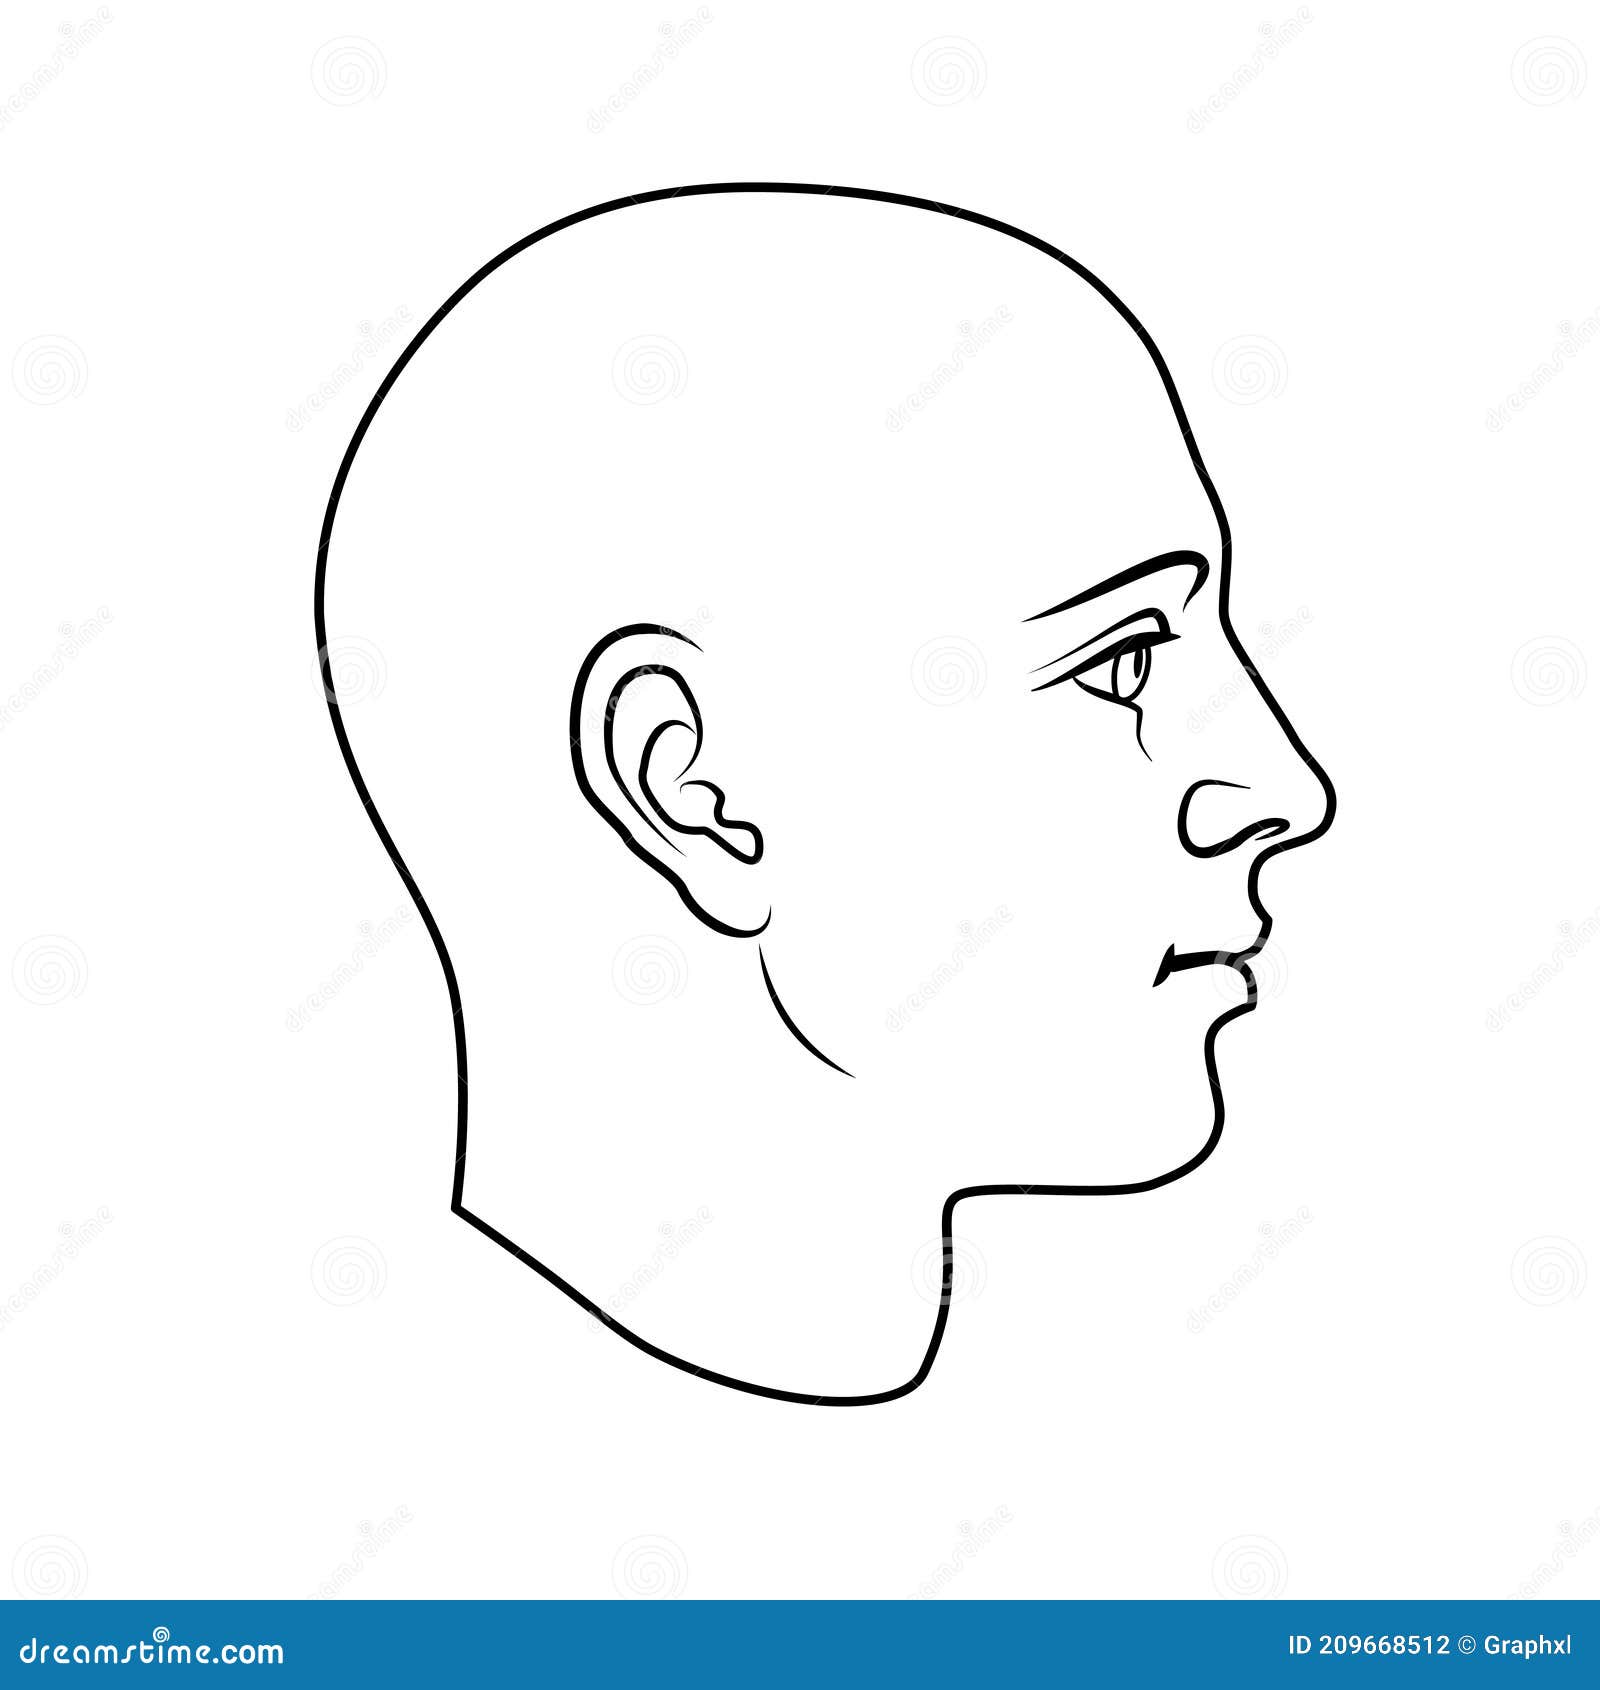 human head in side view, outline variant